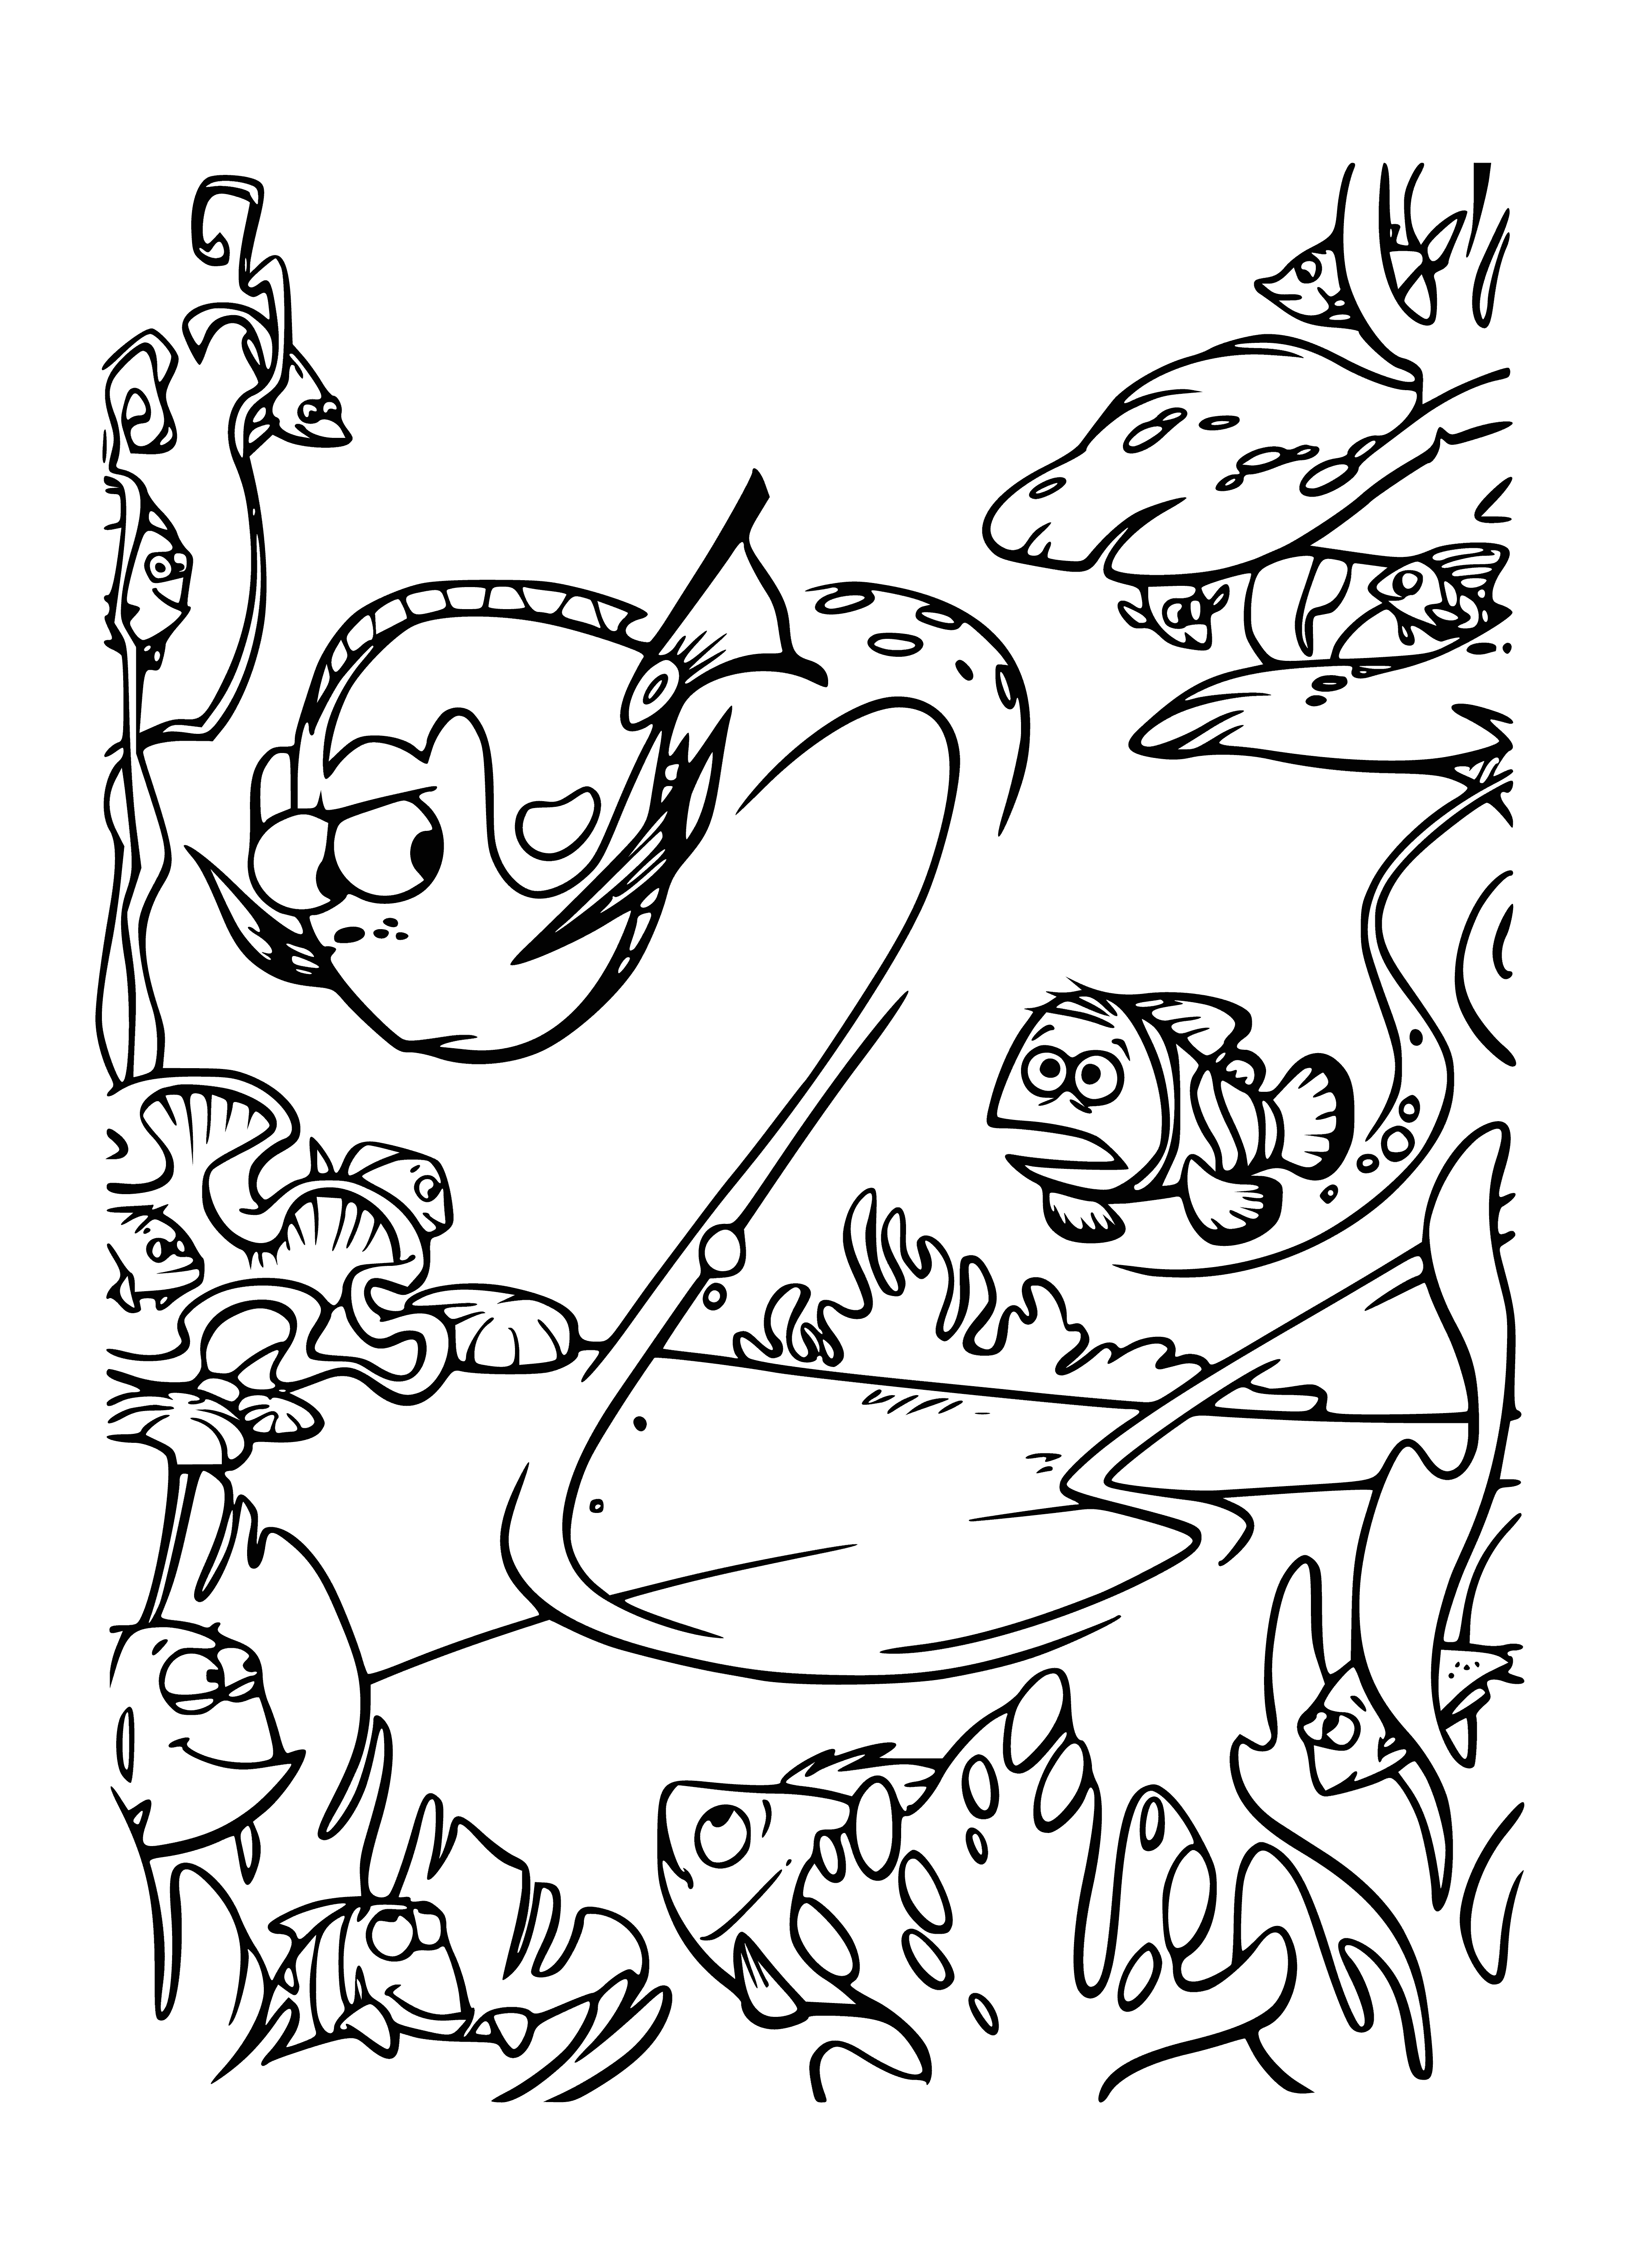 Dory the fish coloring page